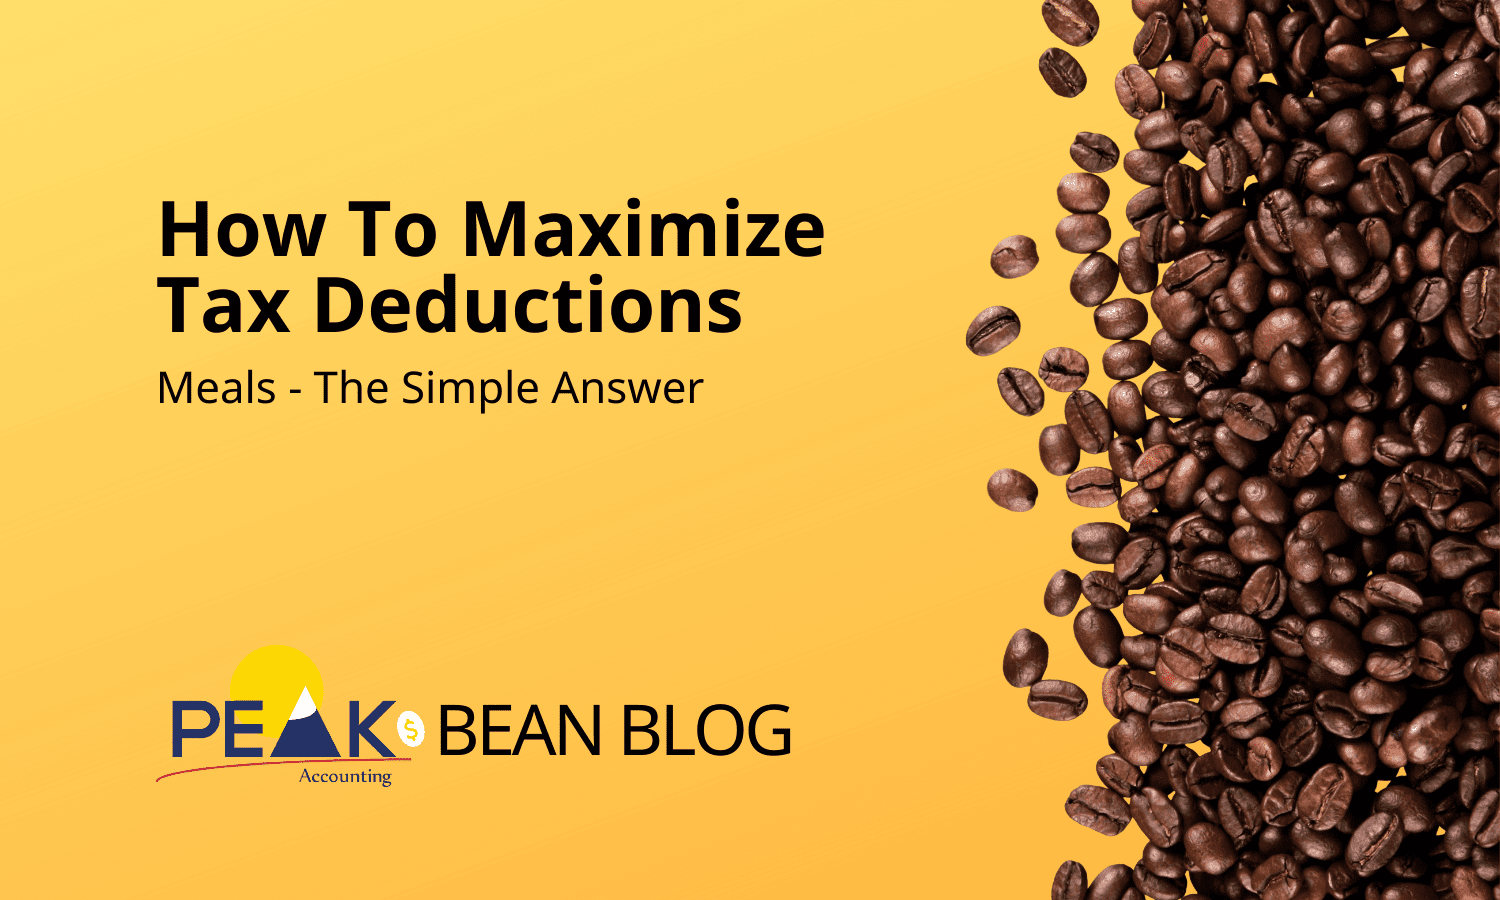 How To Maximize Your Tax Deductions? Meals - The Simple Answer